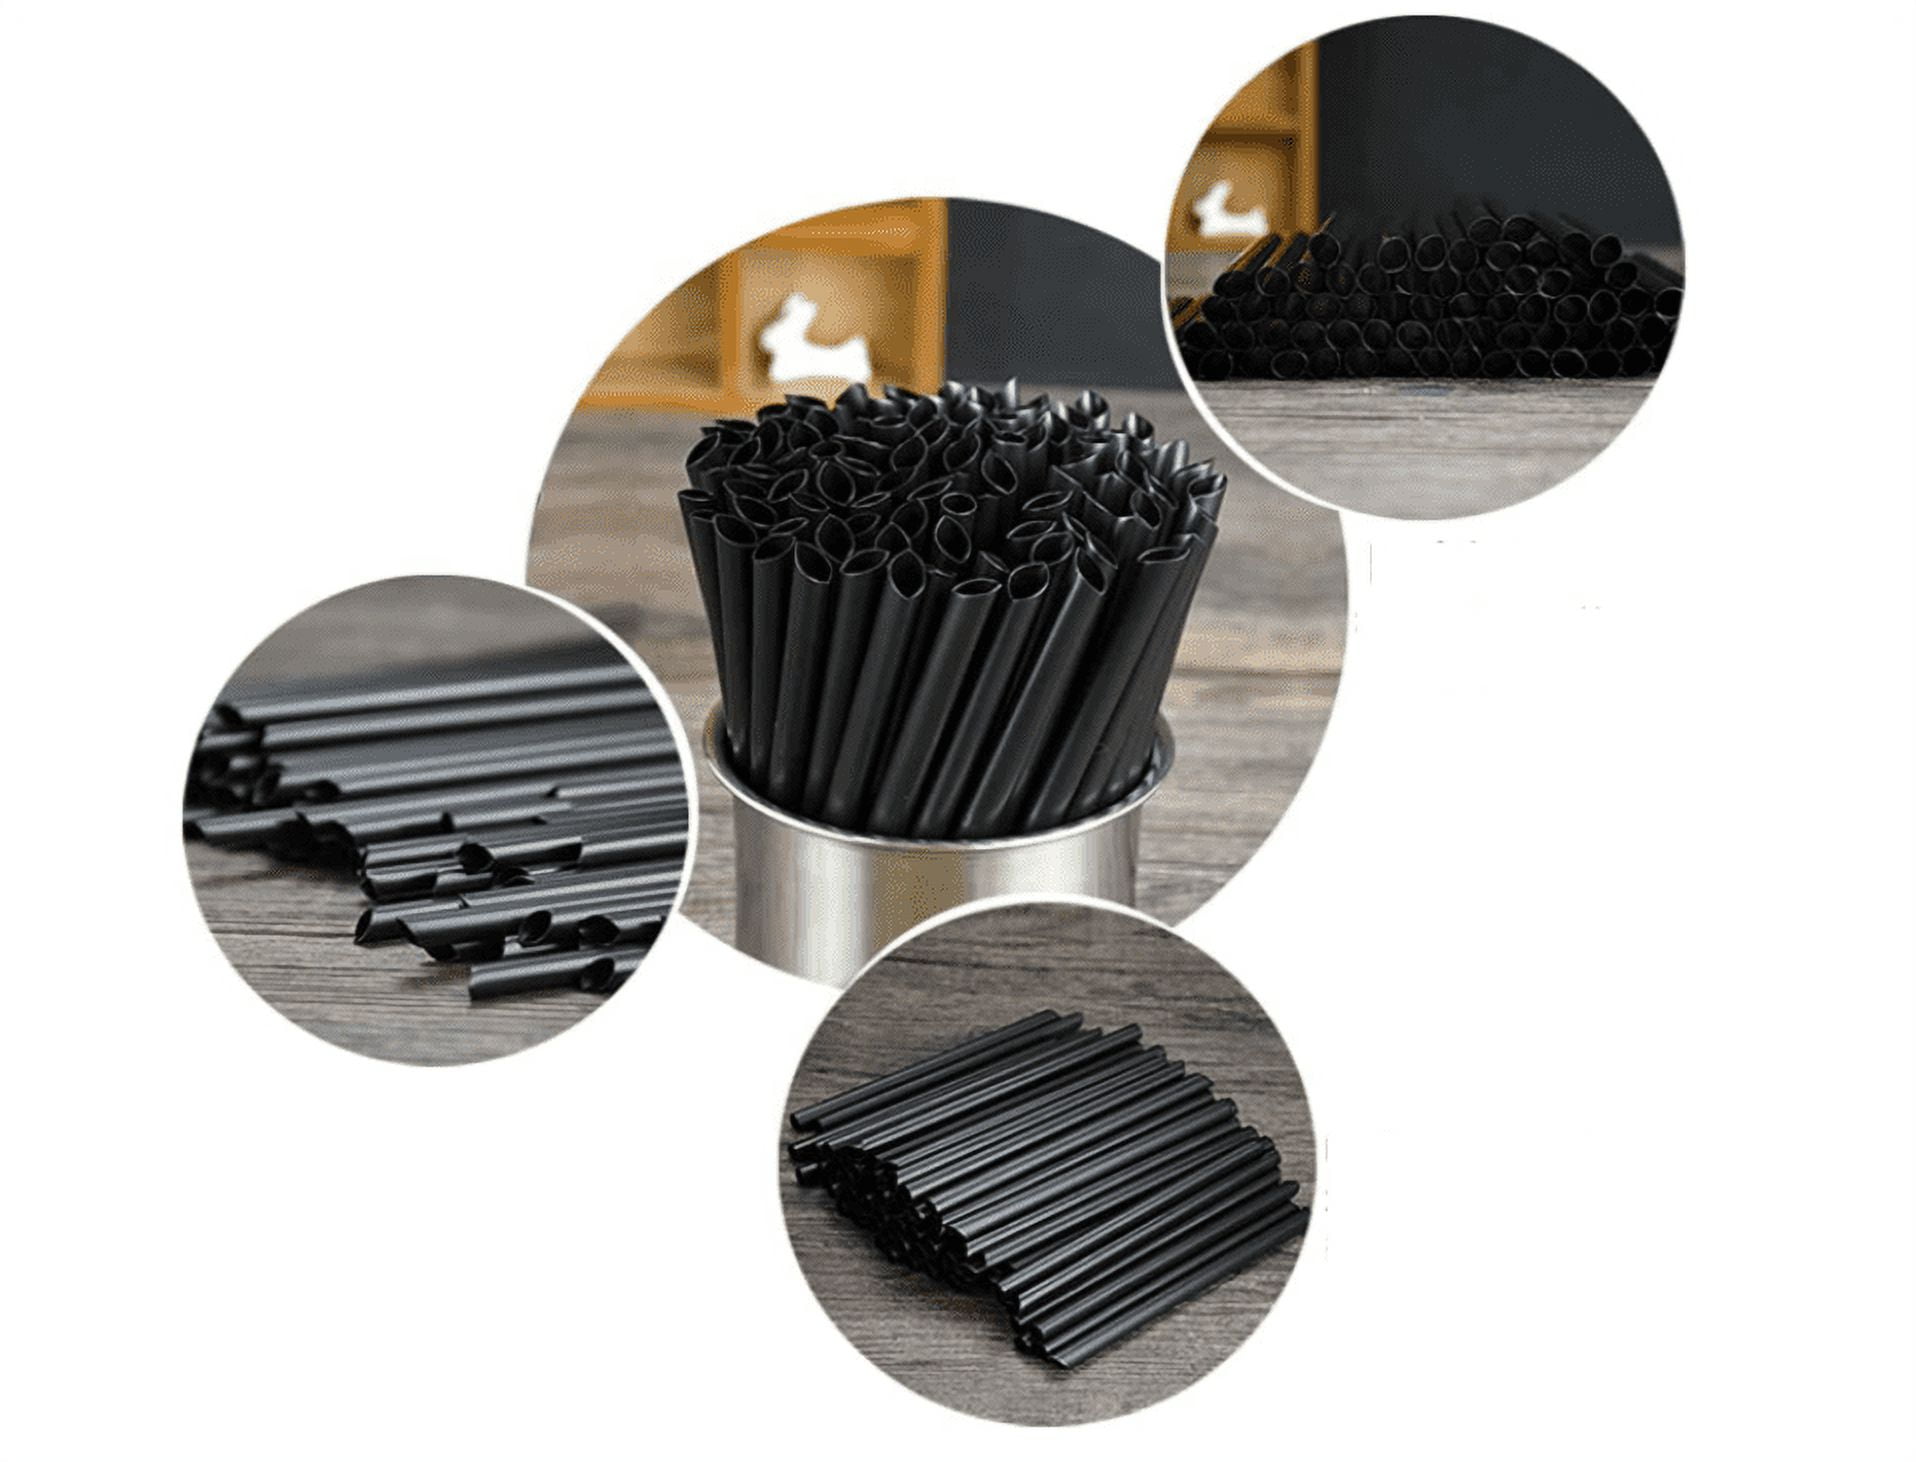 Reusable Metal Boba Straws & Black Smoothie Straws 50Pack.NiceCaTeLe 0.5  Wide Jumbo Stainless Steel Fat Straws in Bulk for Bubble Tea/Tapioca Pearl